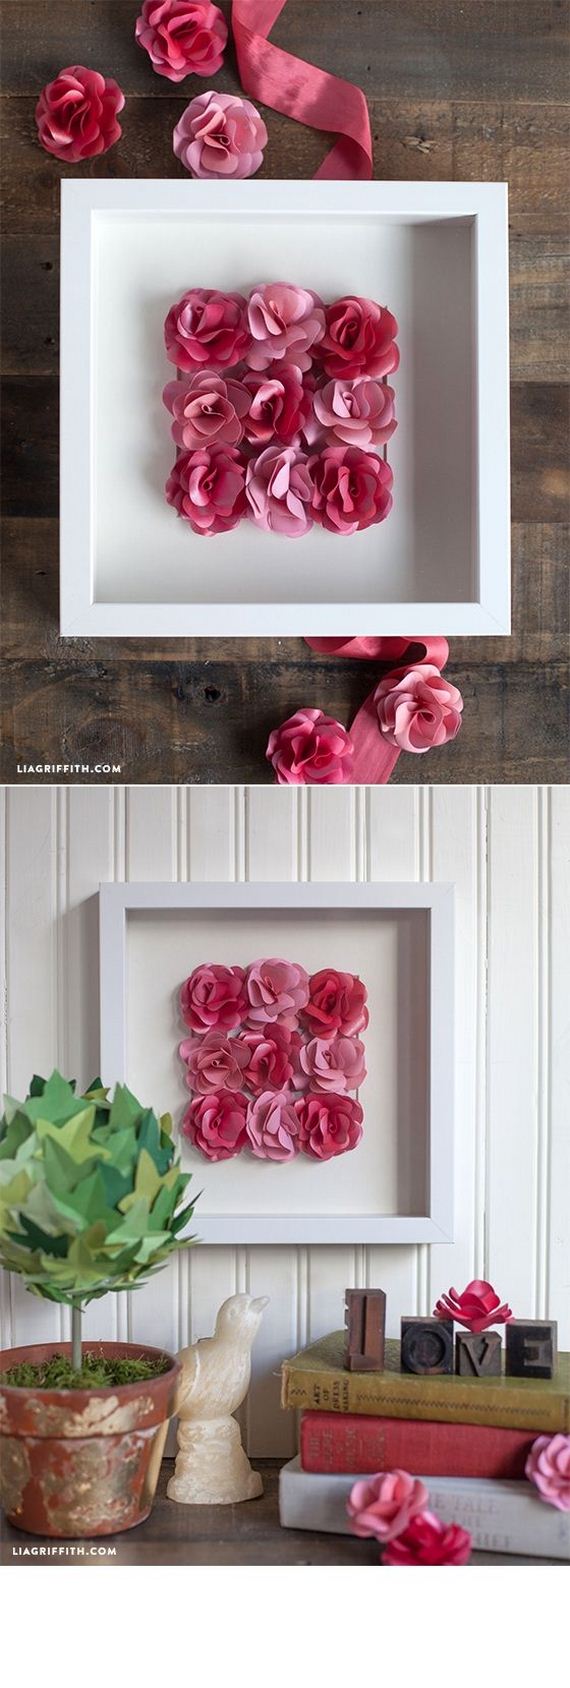 17-Rose-DIY-Projects